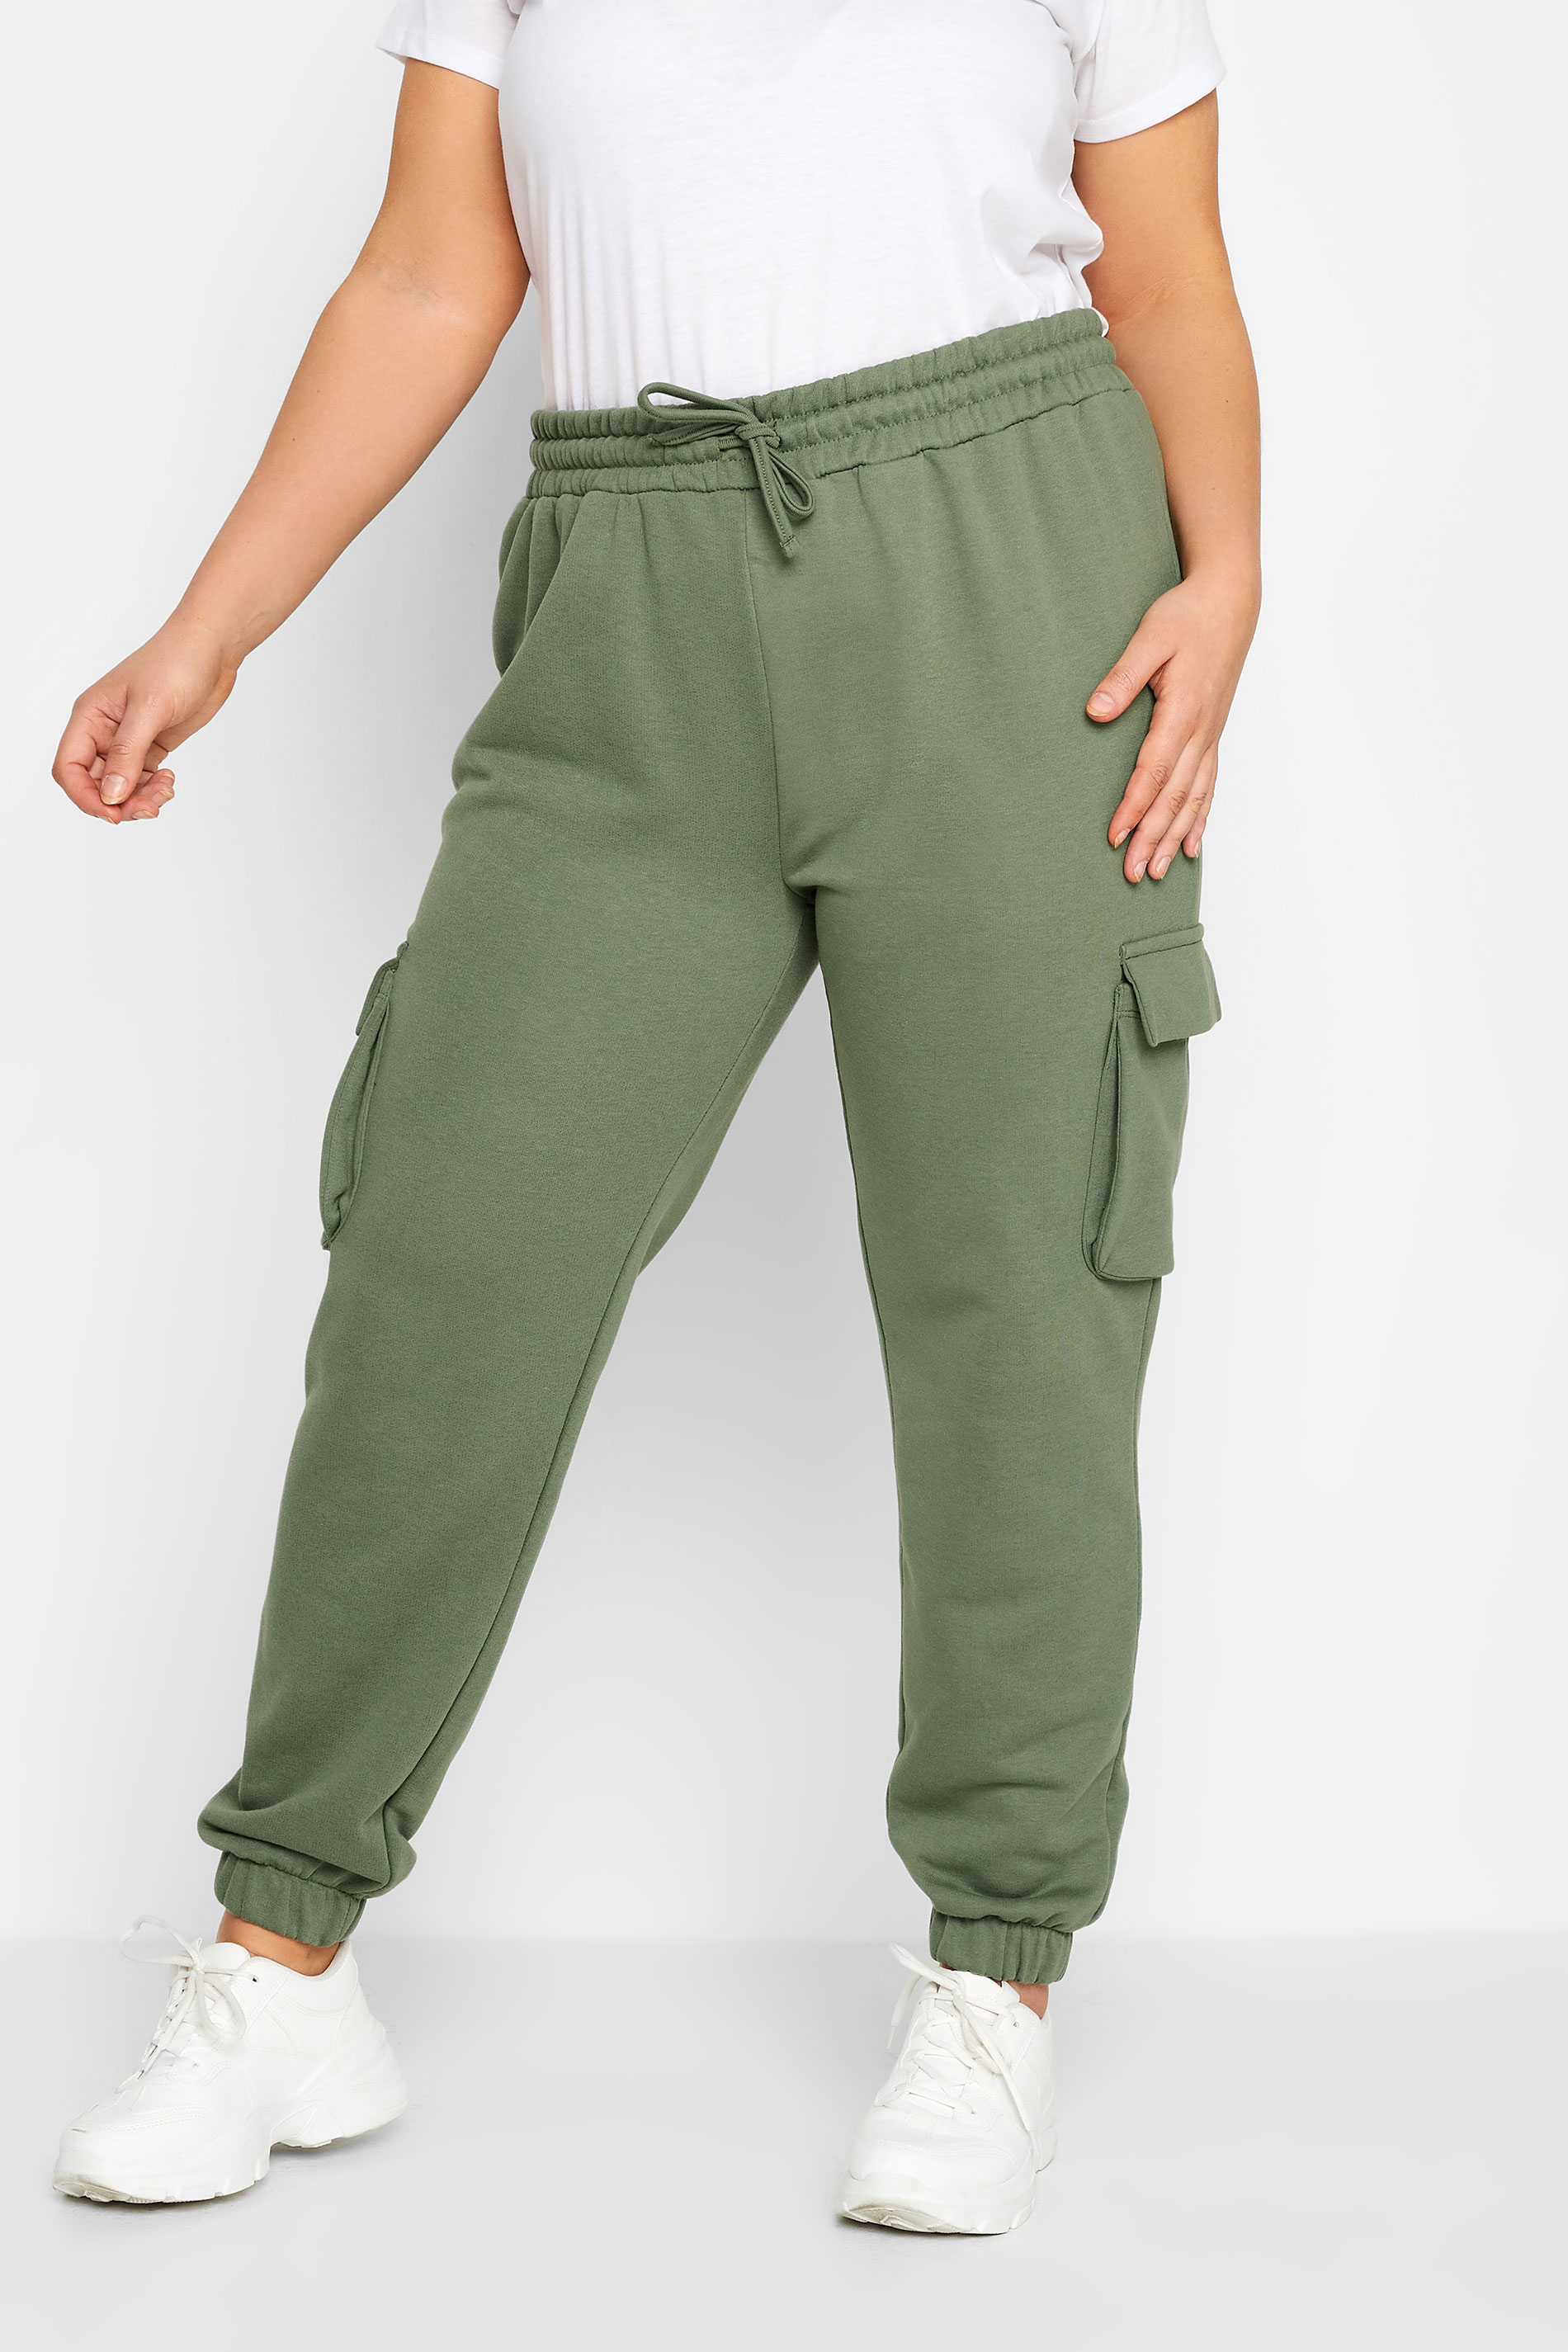 YOURS Curve Plus Size Khaki Green Cargo Joggers | Yours Clothing  1